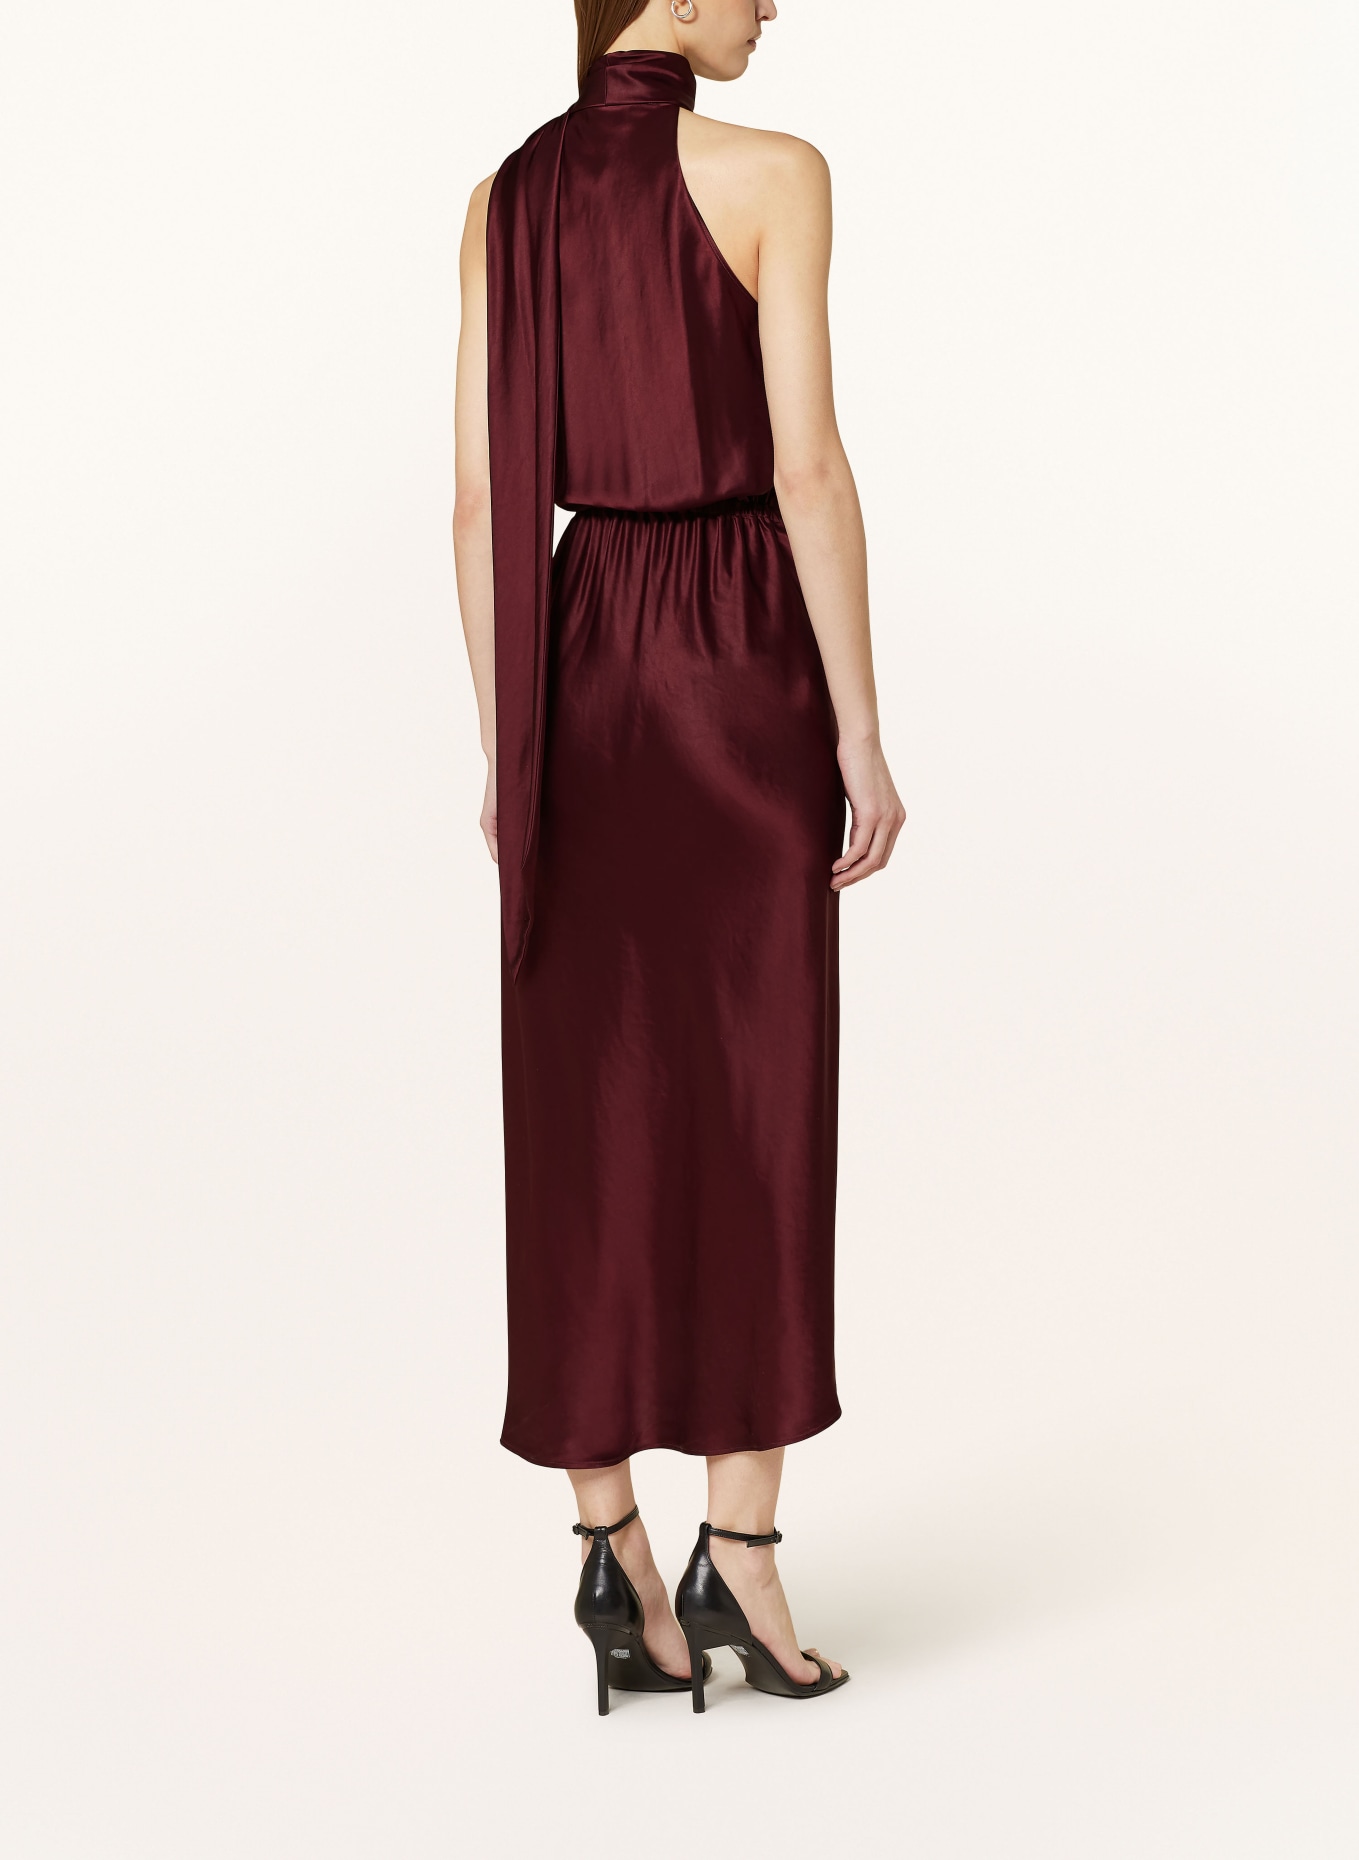 REISS Bow-tie collar dress TAYLA in satin, Color: 64 BURGUNDY (Image 3)